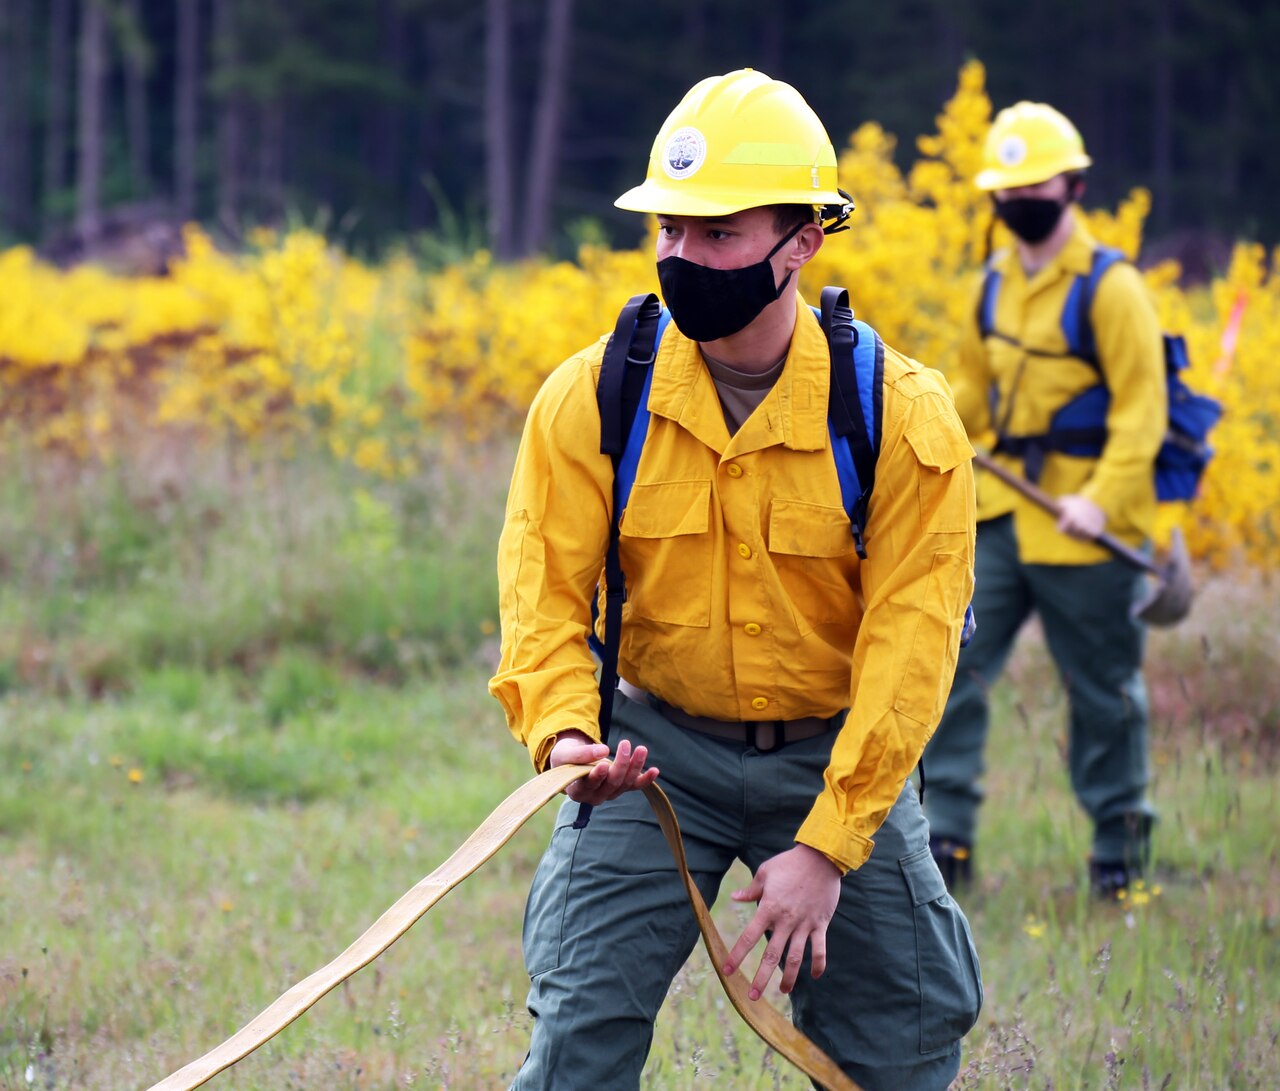 Soldier wearing yellow fire resistant uniform plays out a hose. Behind him, another firefighter stands ready with a shovel.